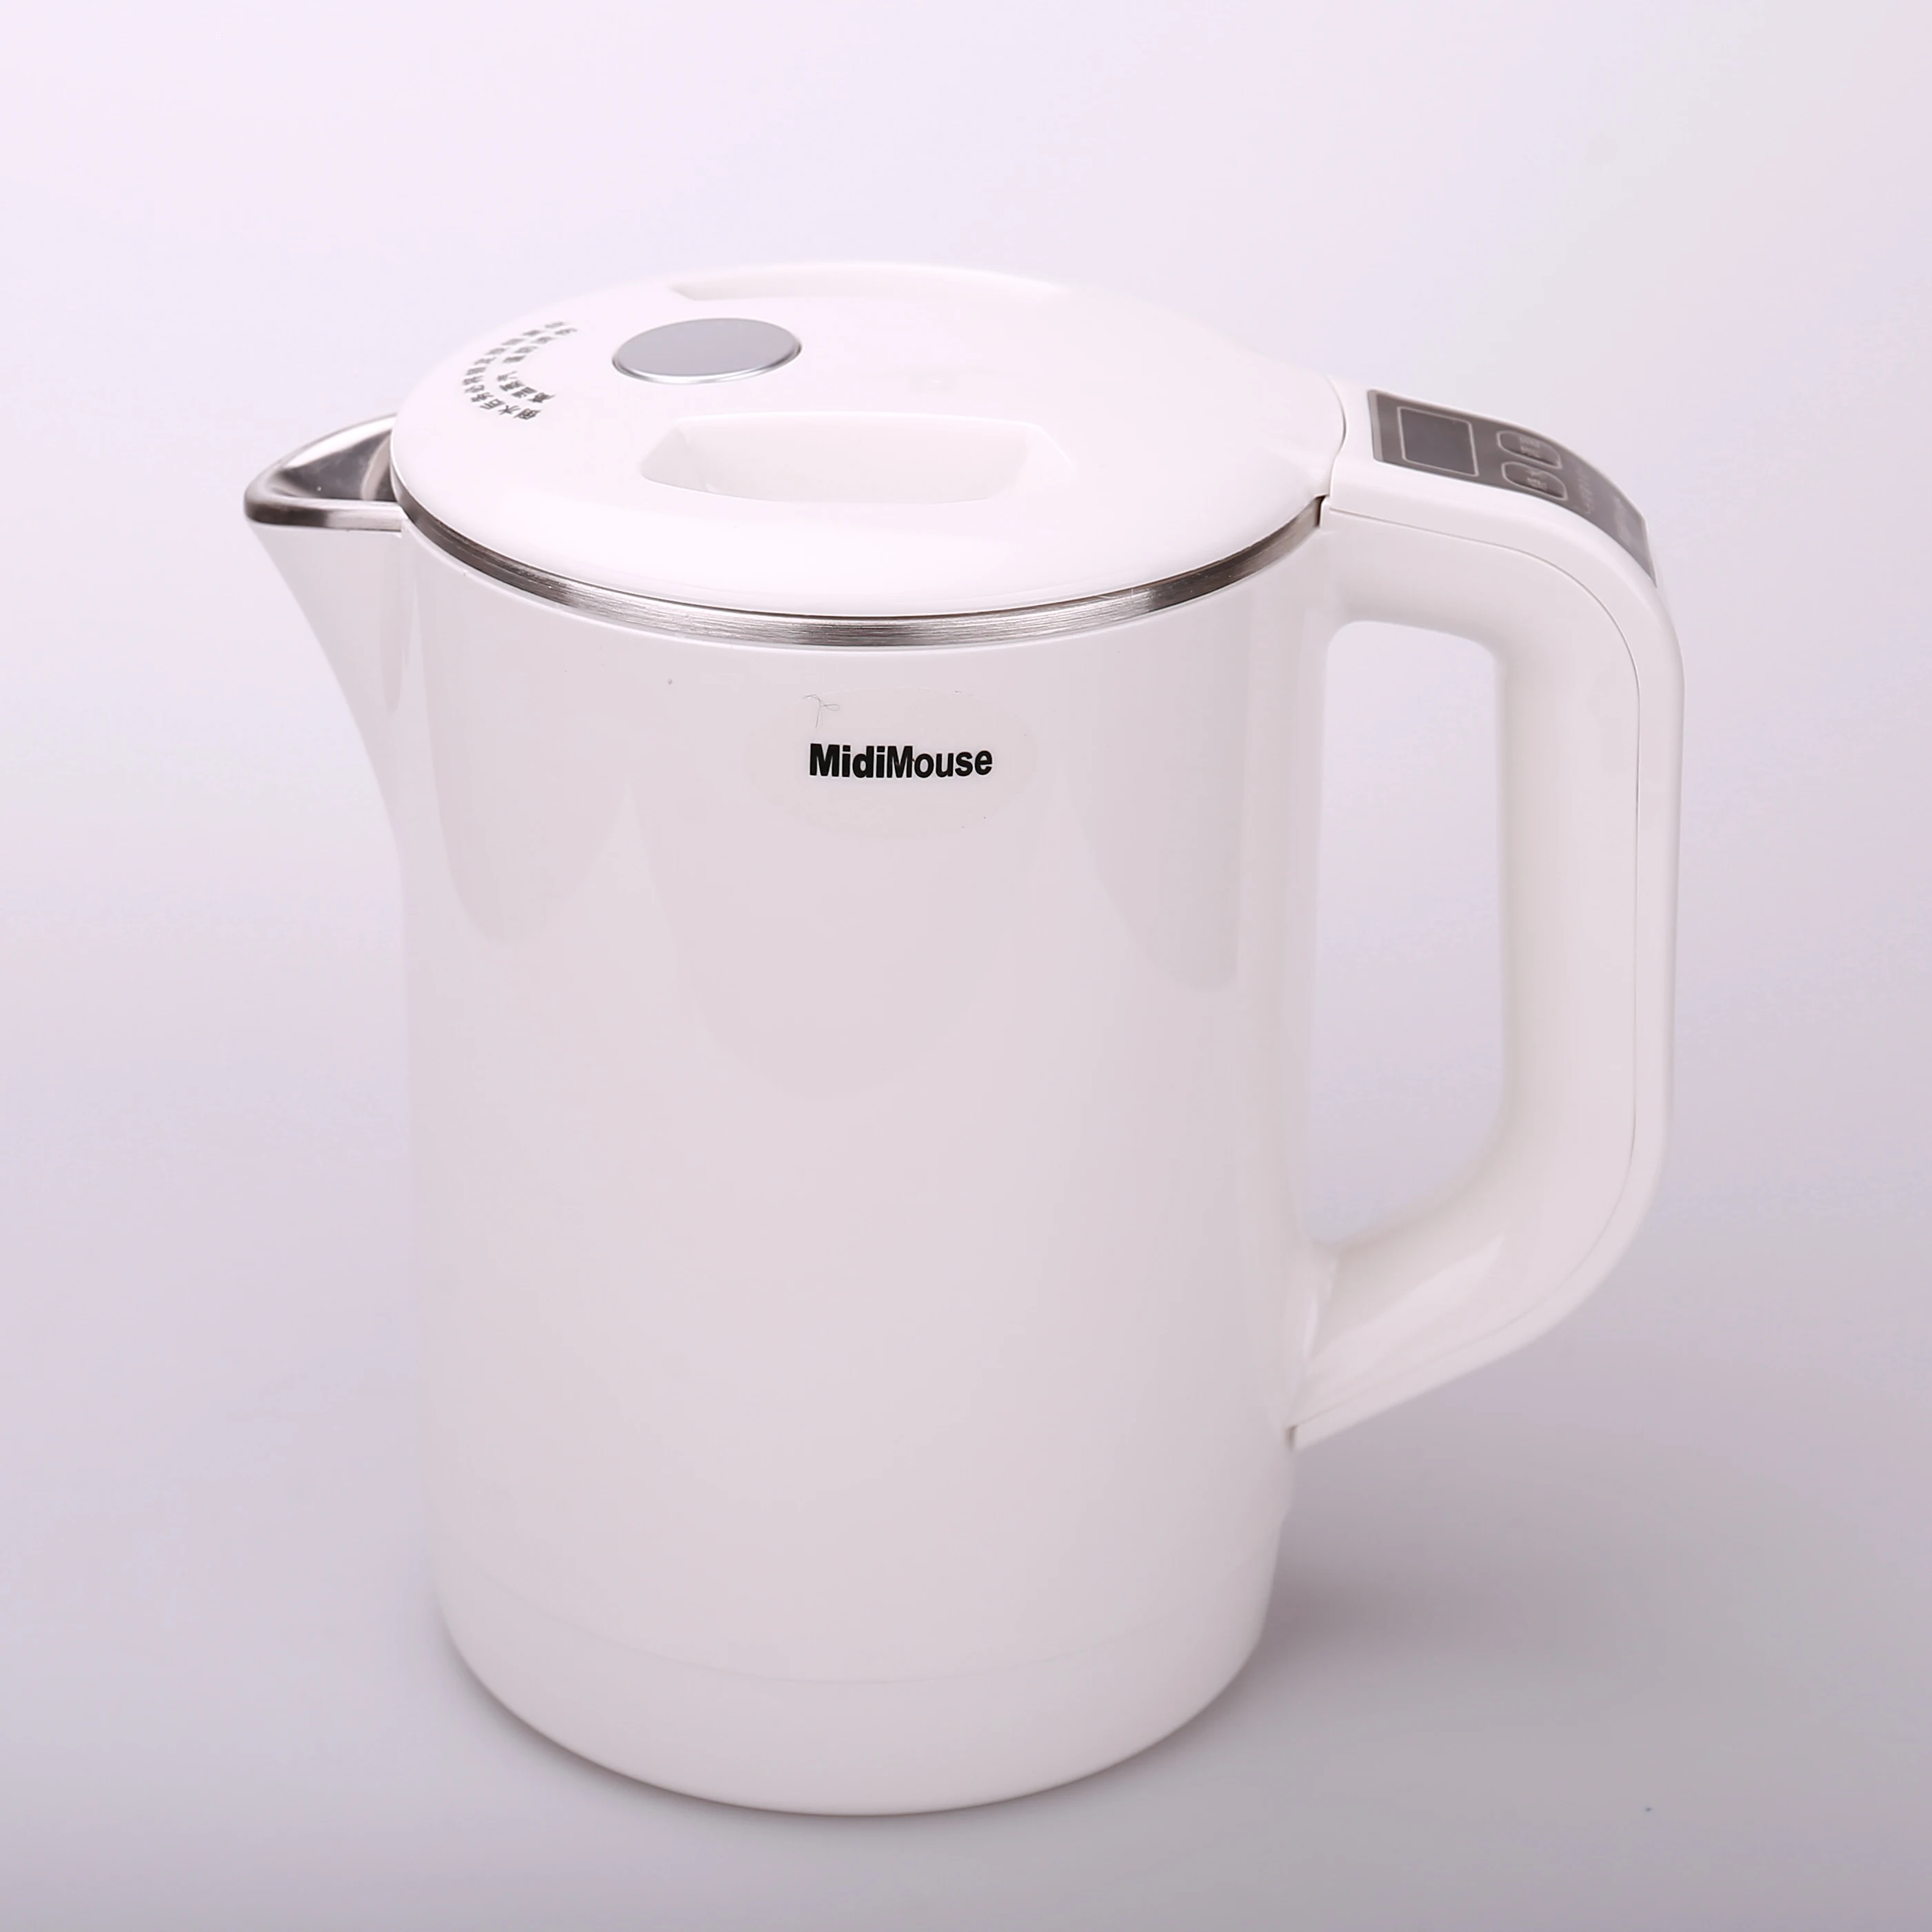 1.2L electric kettle used in car and truck and home 12v to 220v version or 24v to 220V version or 12v to 24v version